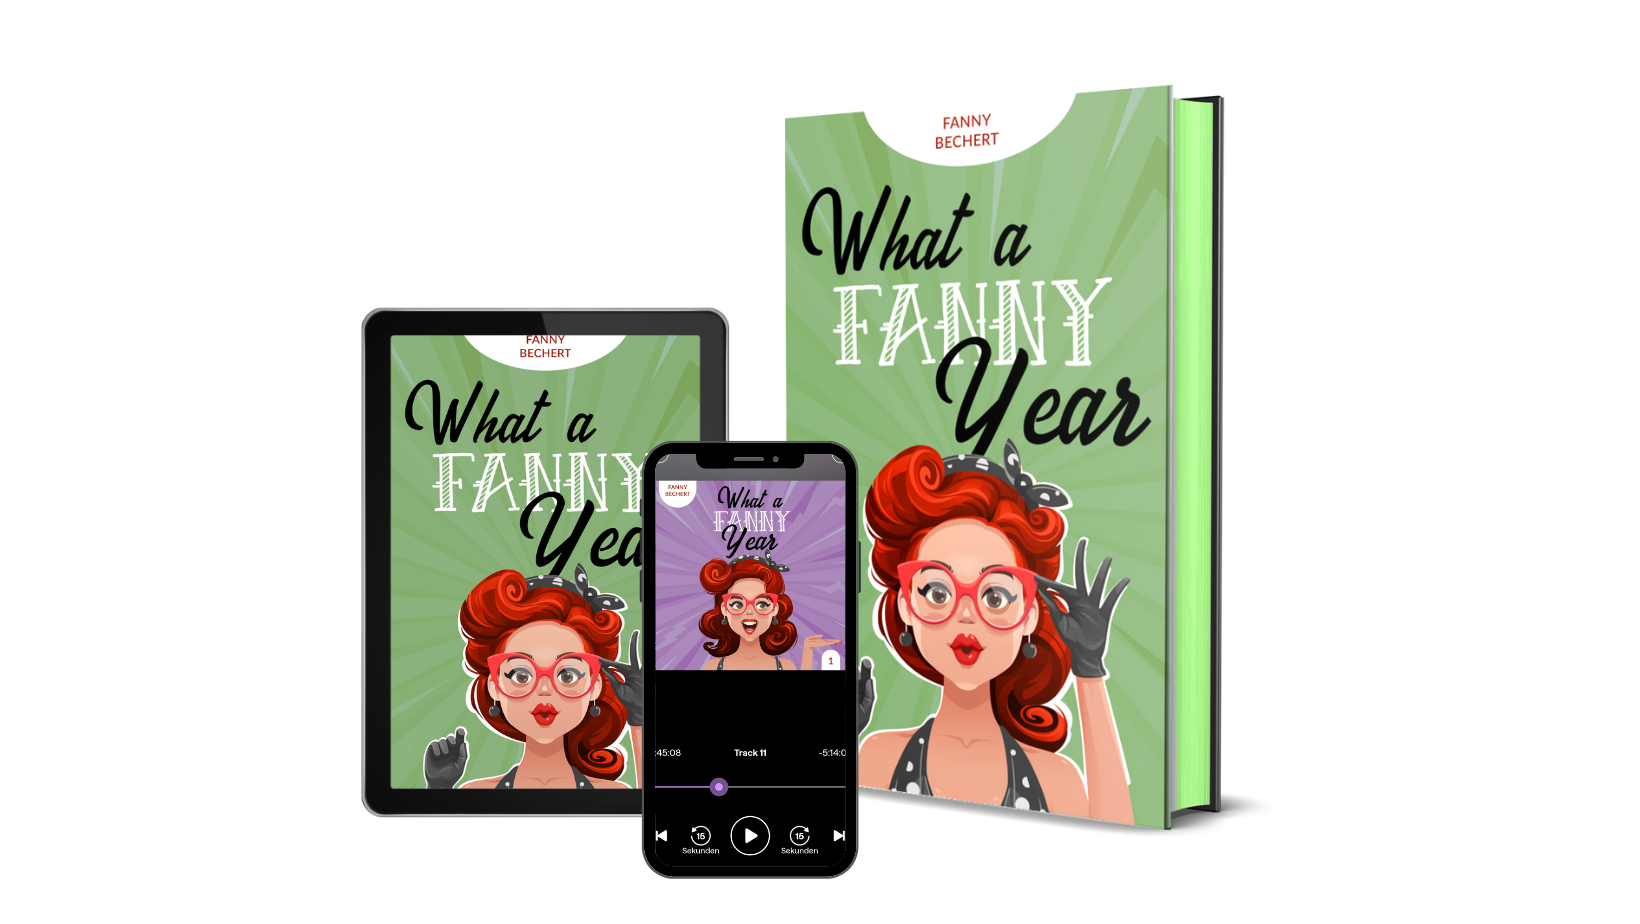 "What a FANNY year" als Hardcover, Ebook und Hörbuch